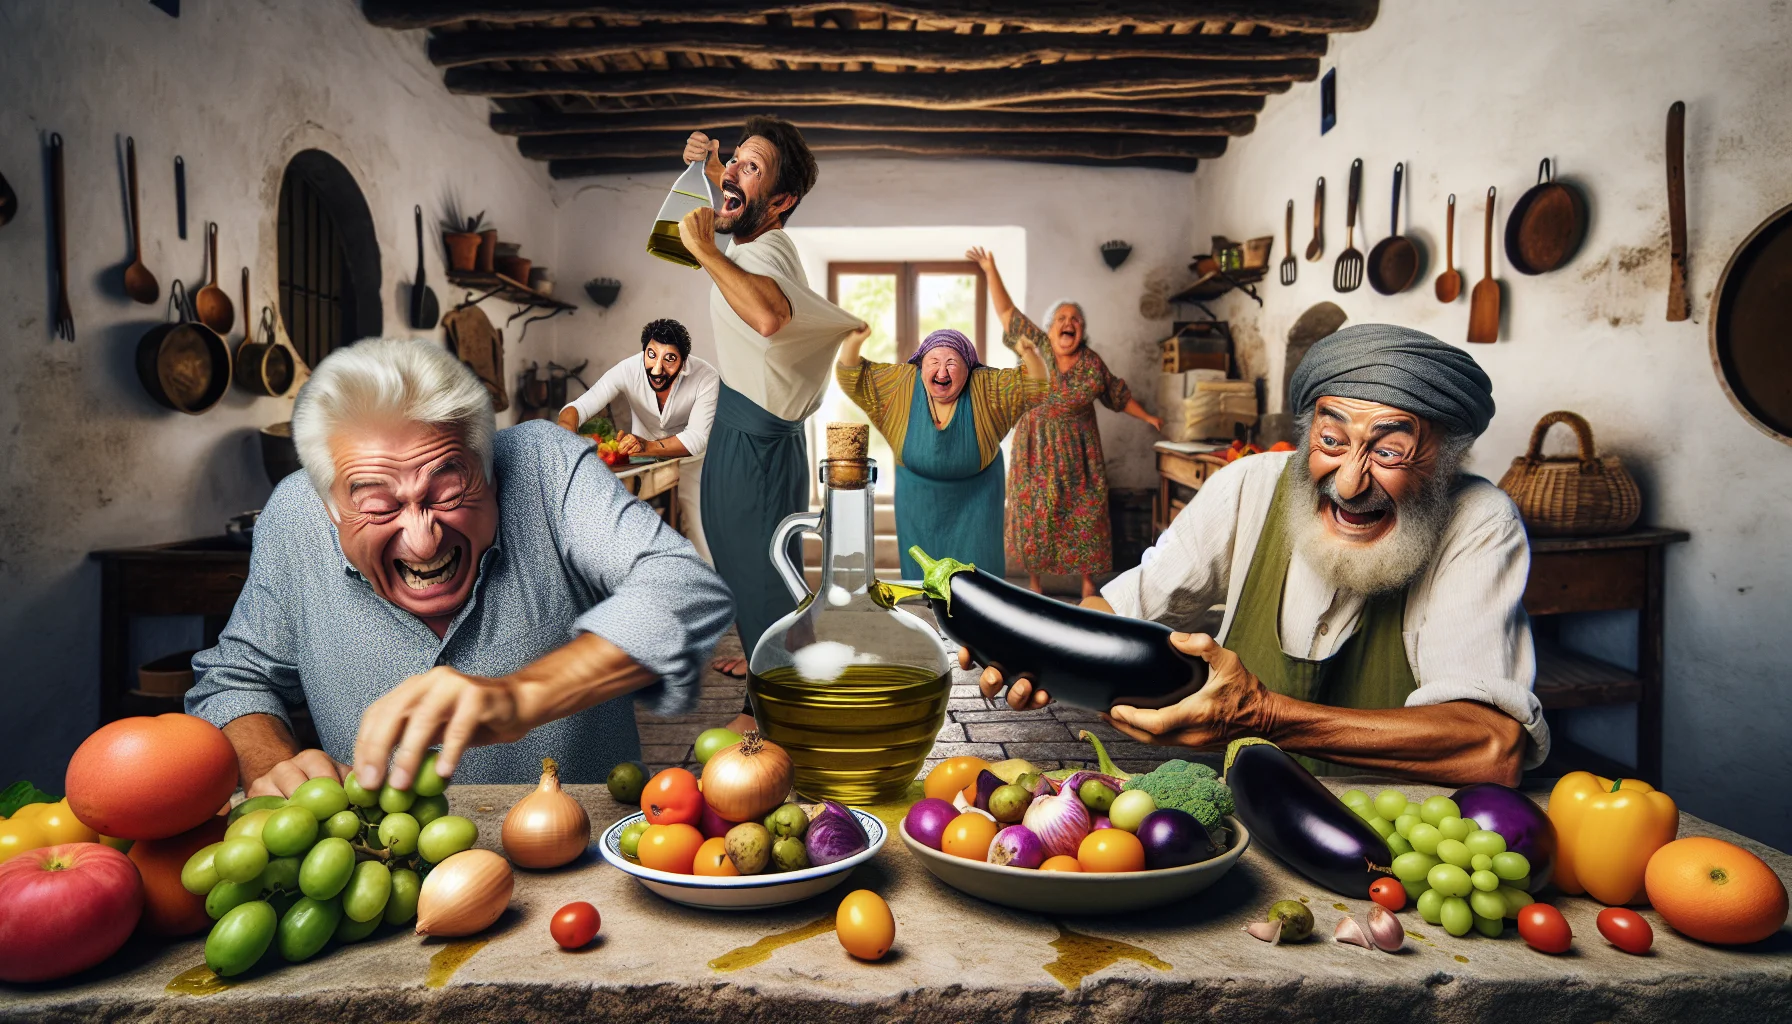 Imagine a humorous scene in a rustic Mediterranean kitchen. An older Caucasian man is struggling to open a large olive oil bottle with exaggerated effort, laughing at the situation. On the other side, an elderly Middle-Eastern woman is trying to balance a tall tower of colorful fruits on a small plate while chuckling. A South Asian elderly man is in the background, chasing a runaway eggplant across the stone floor. There is a vibrant bowl of salad in the center of the table, and a wholesome, healthy Mediterranean meal is still being prepared, despite all the lighthearted chaos.